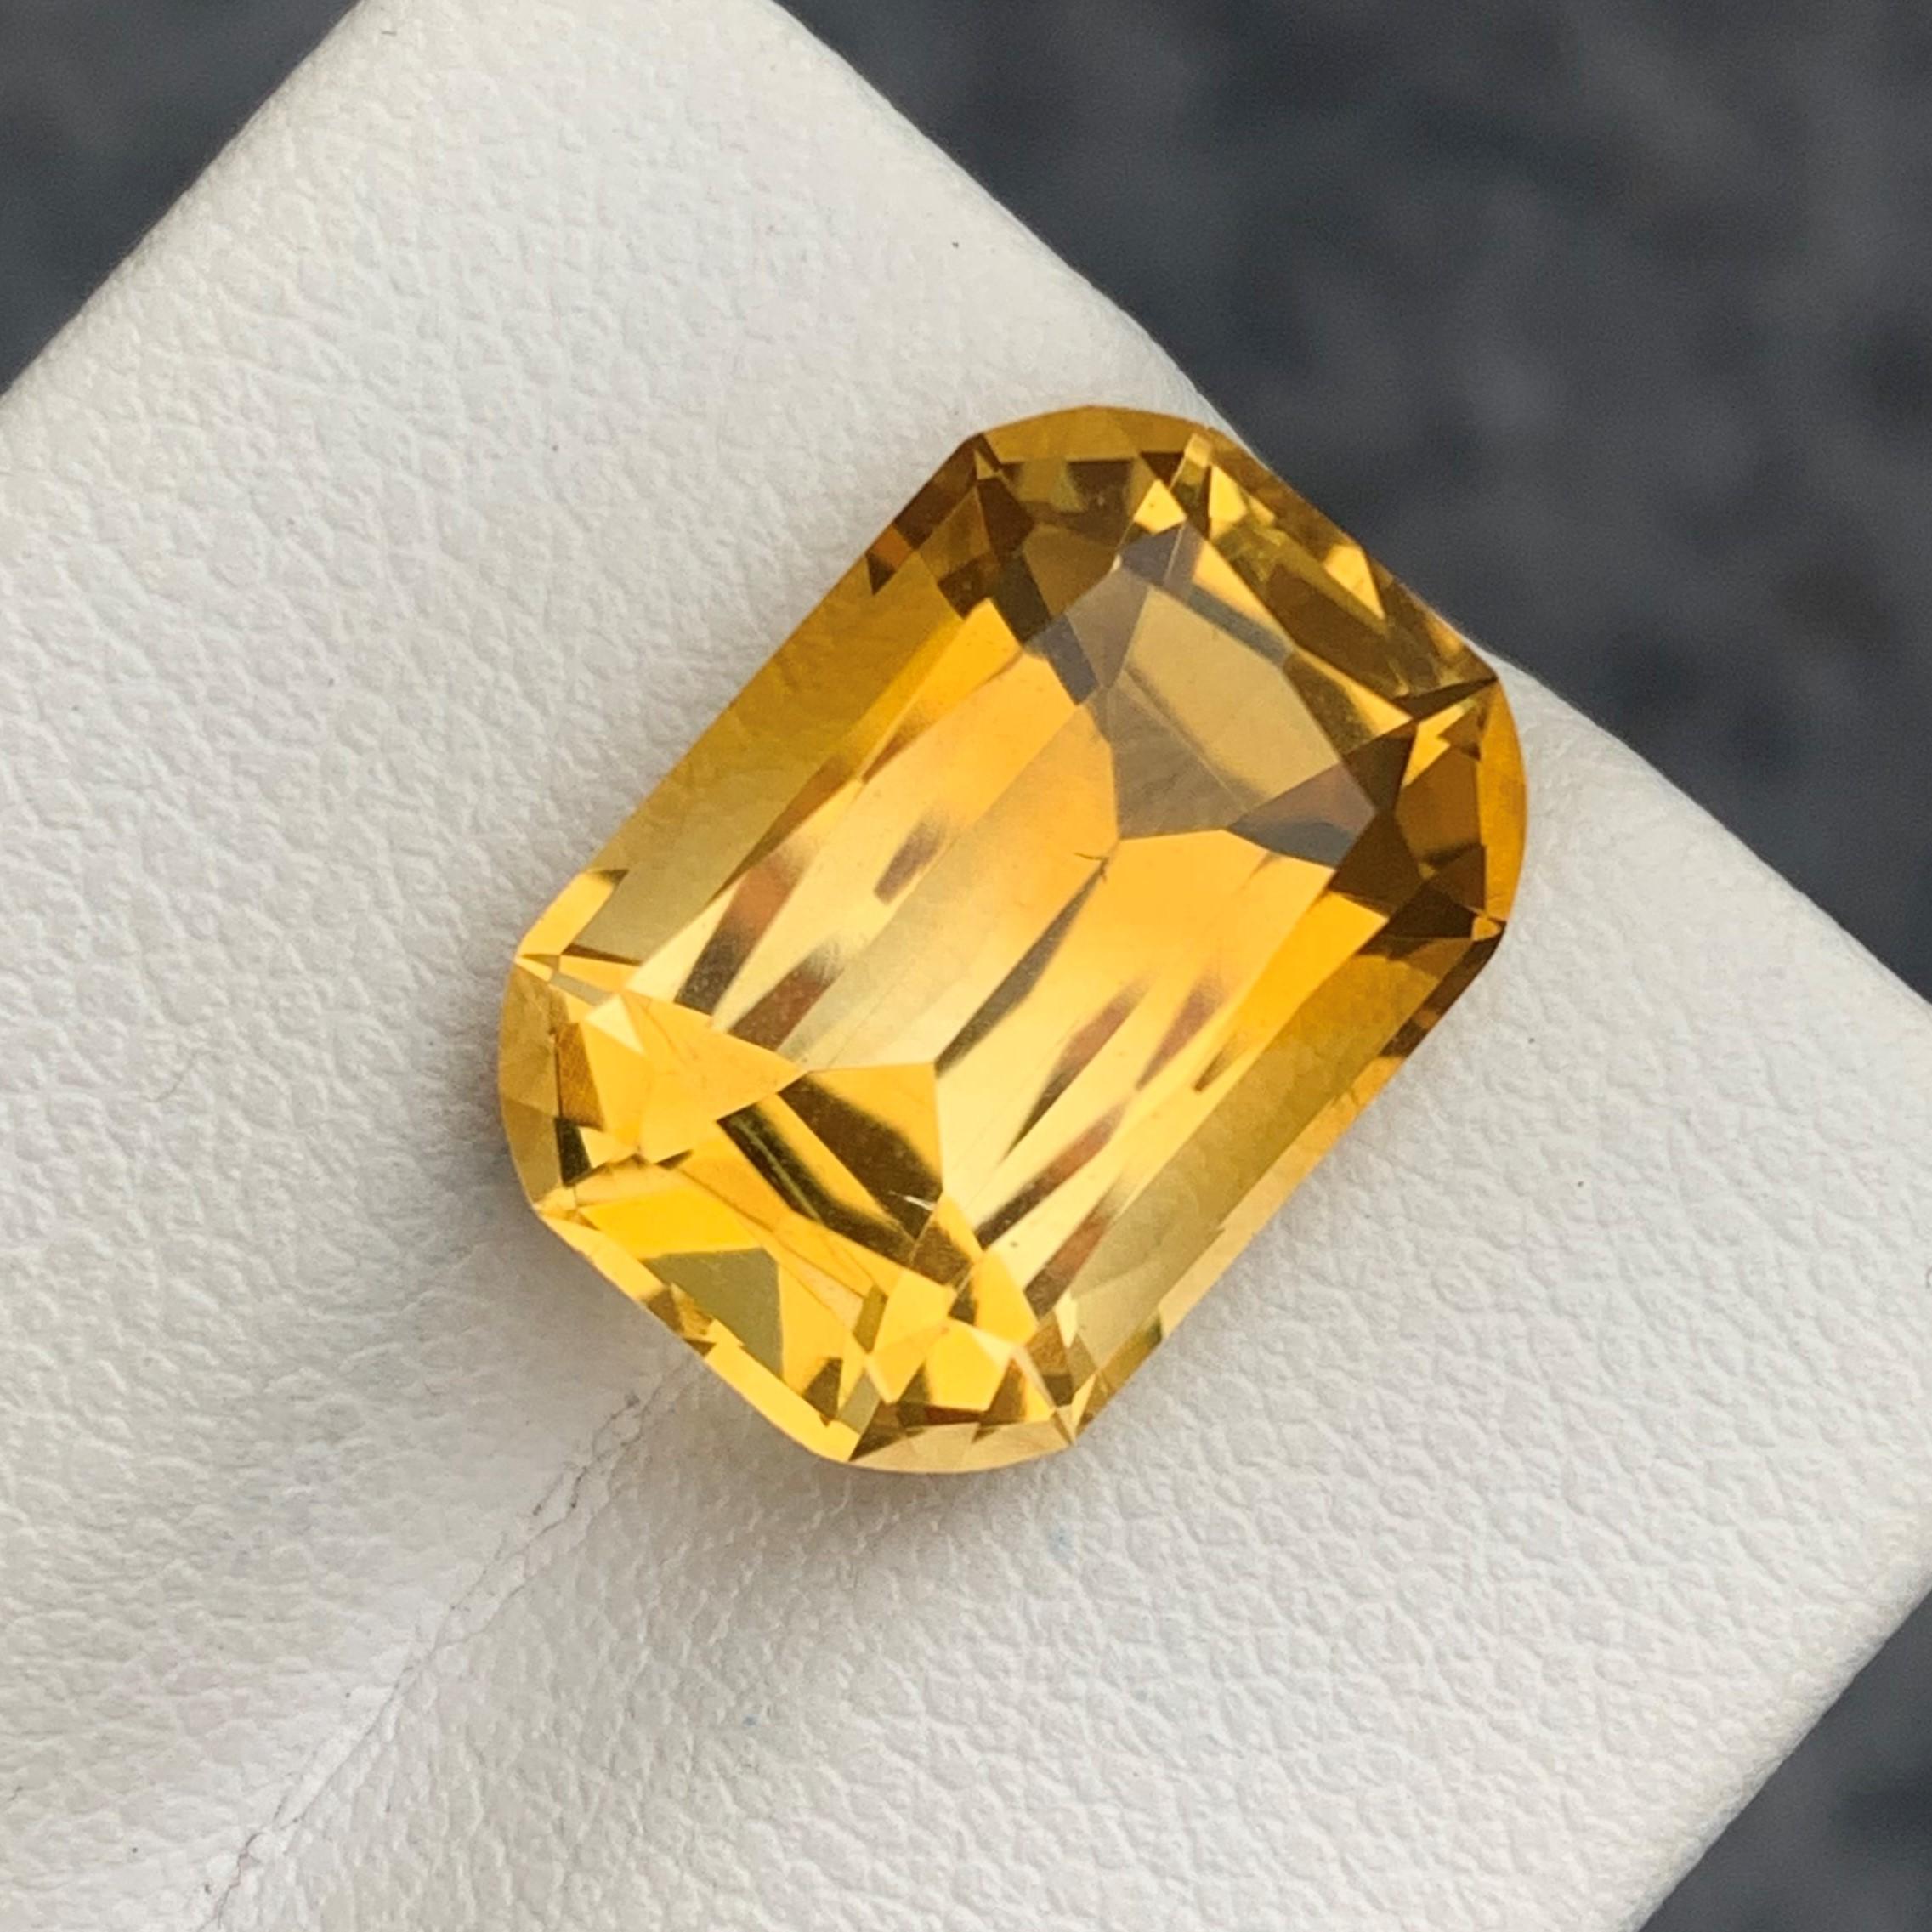 Faceted Yellow Citrine
Weight : 9.05 Carats
Dimensions : 15.1x10.8x8.2Mm
Clarity : Loupe Clean 
Origin : Brazil
Color: Yellow
Shape: Long Cushion
Certificate: On Demand
Month: November
.
The Many Healing Properties of Citrine
Increase Optimism, And